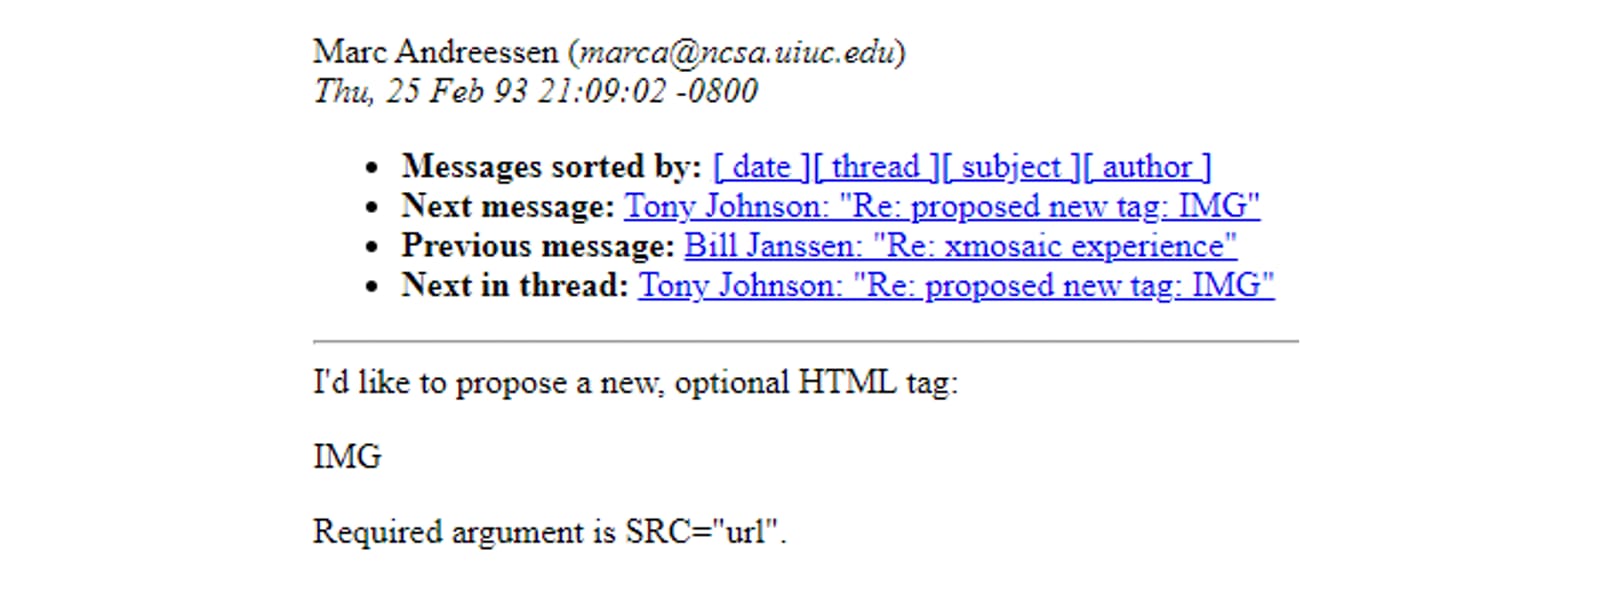 Screenshot: message of Marc Andreessen suggesting the HTML tag “IMG”